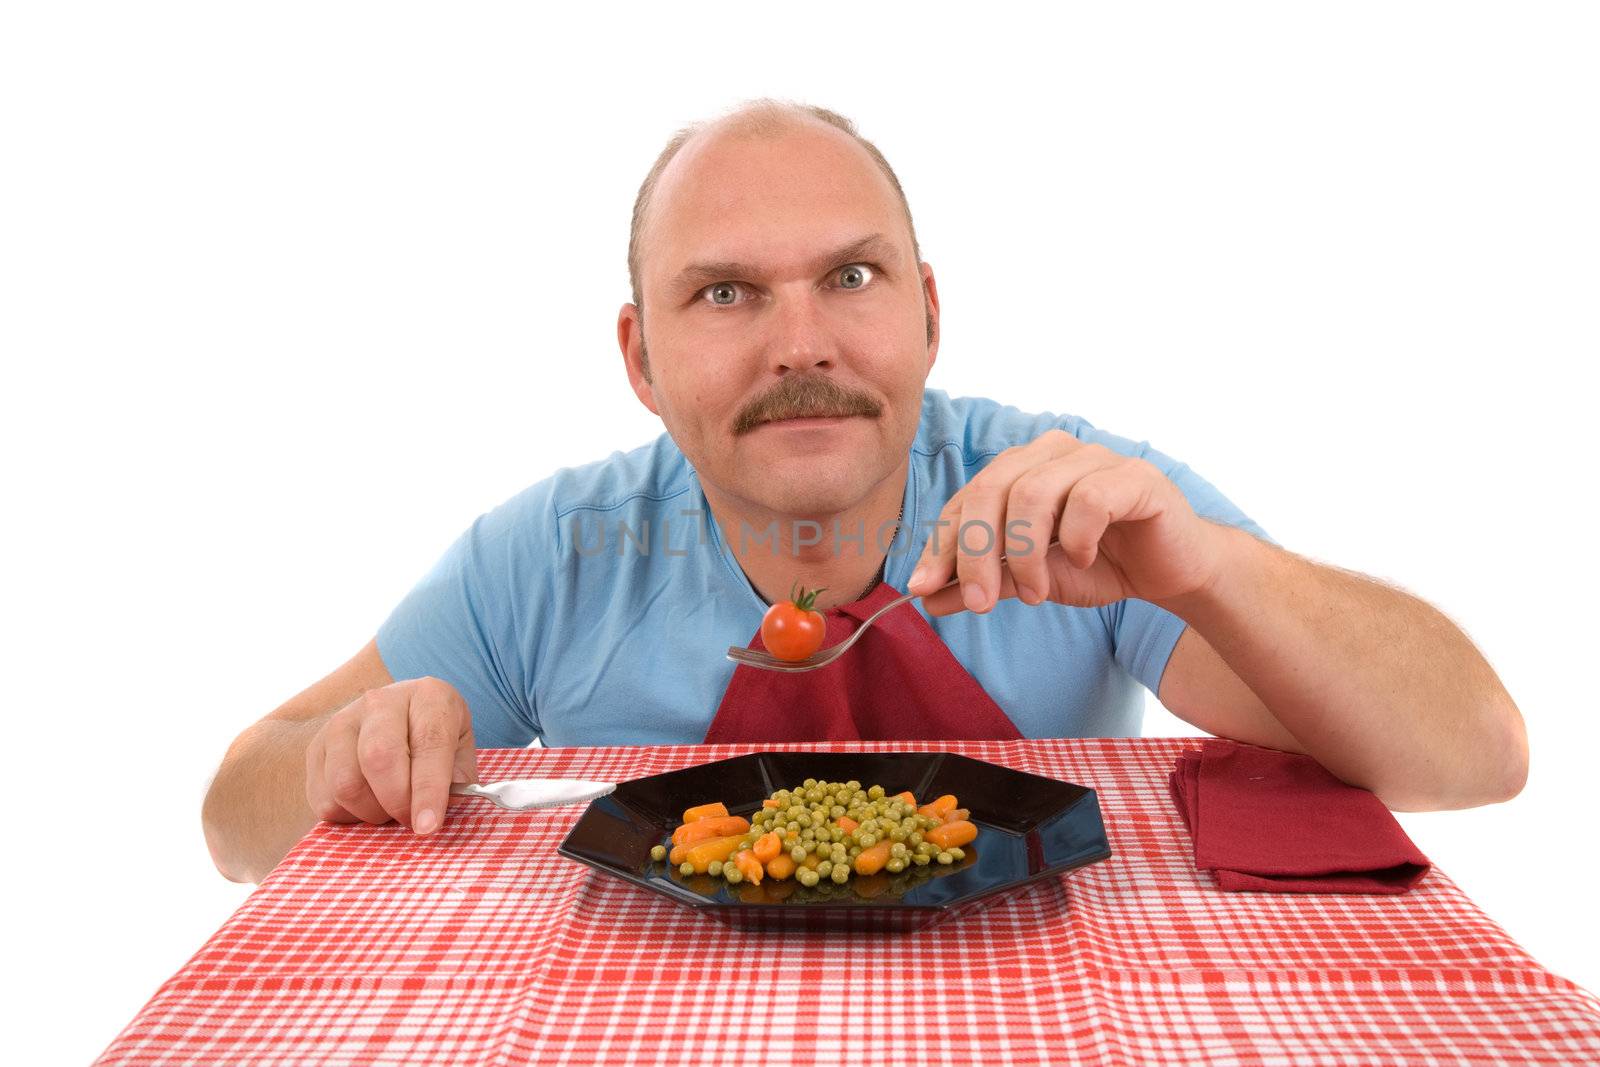 Mature man sitting with a plate full of vegetables and a tomato on his fork